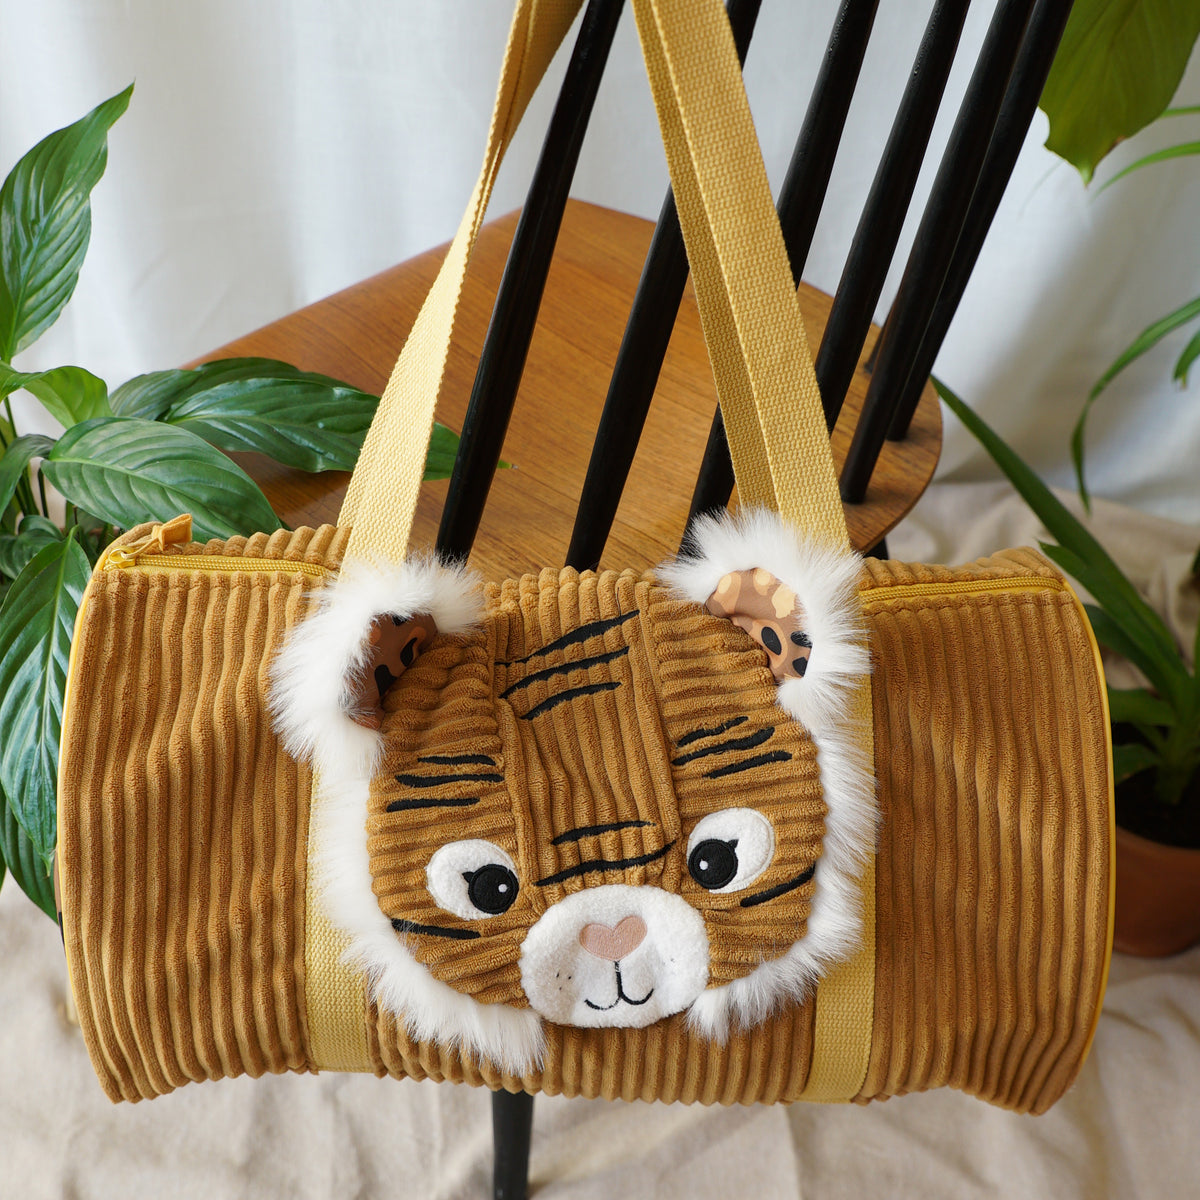 Weekend Travel Bag Speculos the Tiger